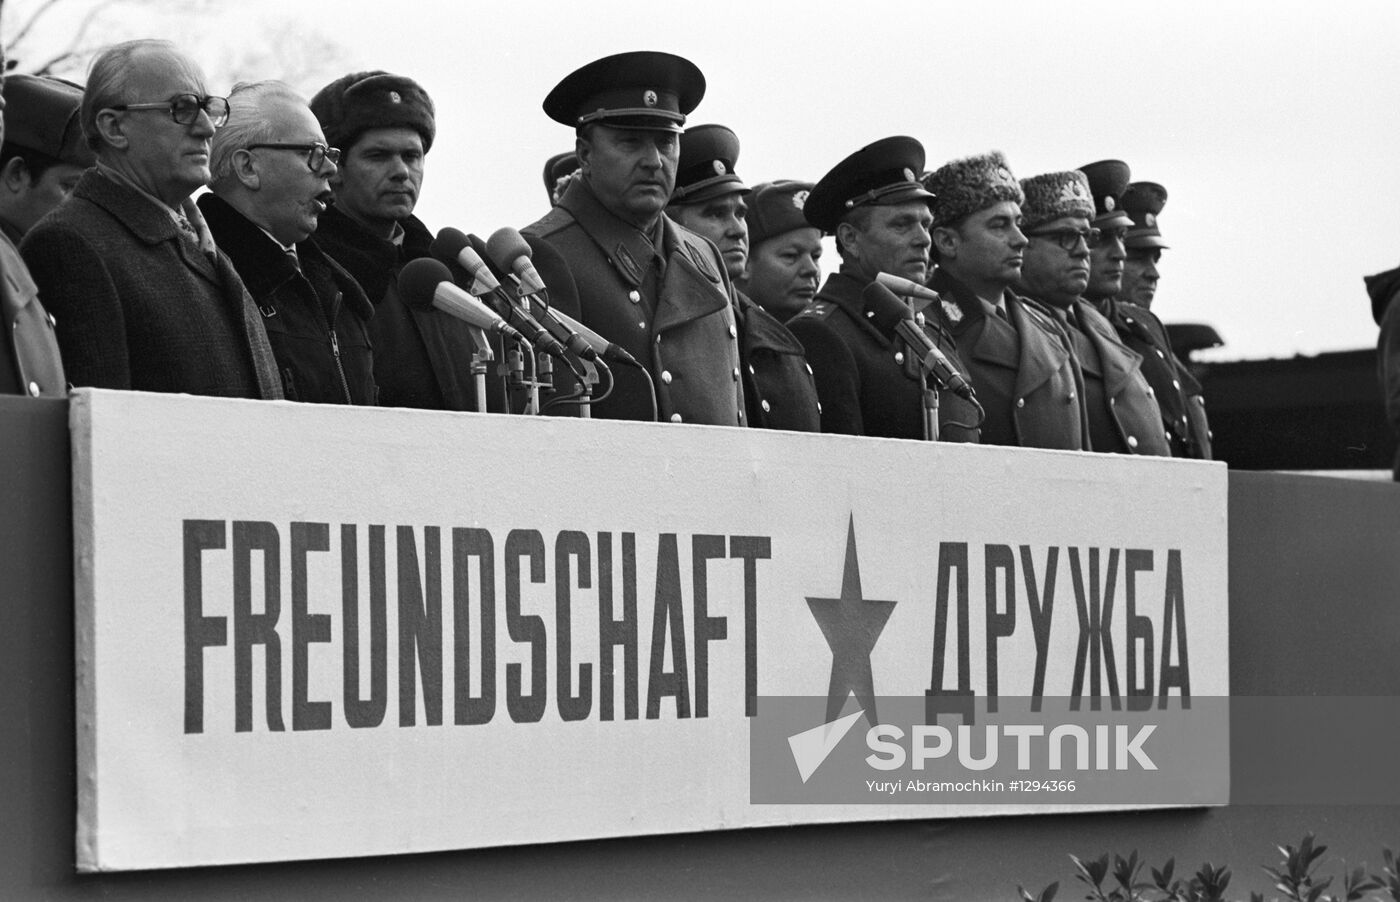 Withdrawal of Soviet troops from German Democratic Republic